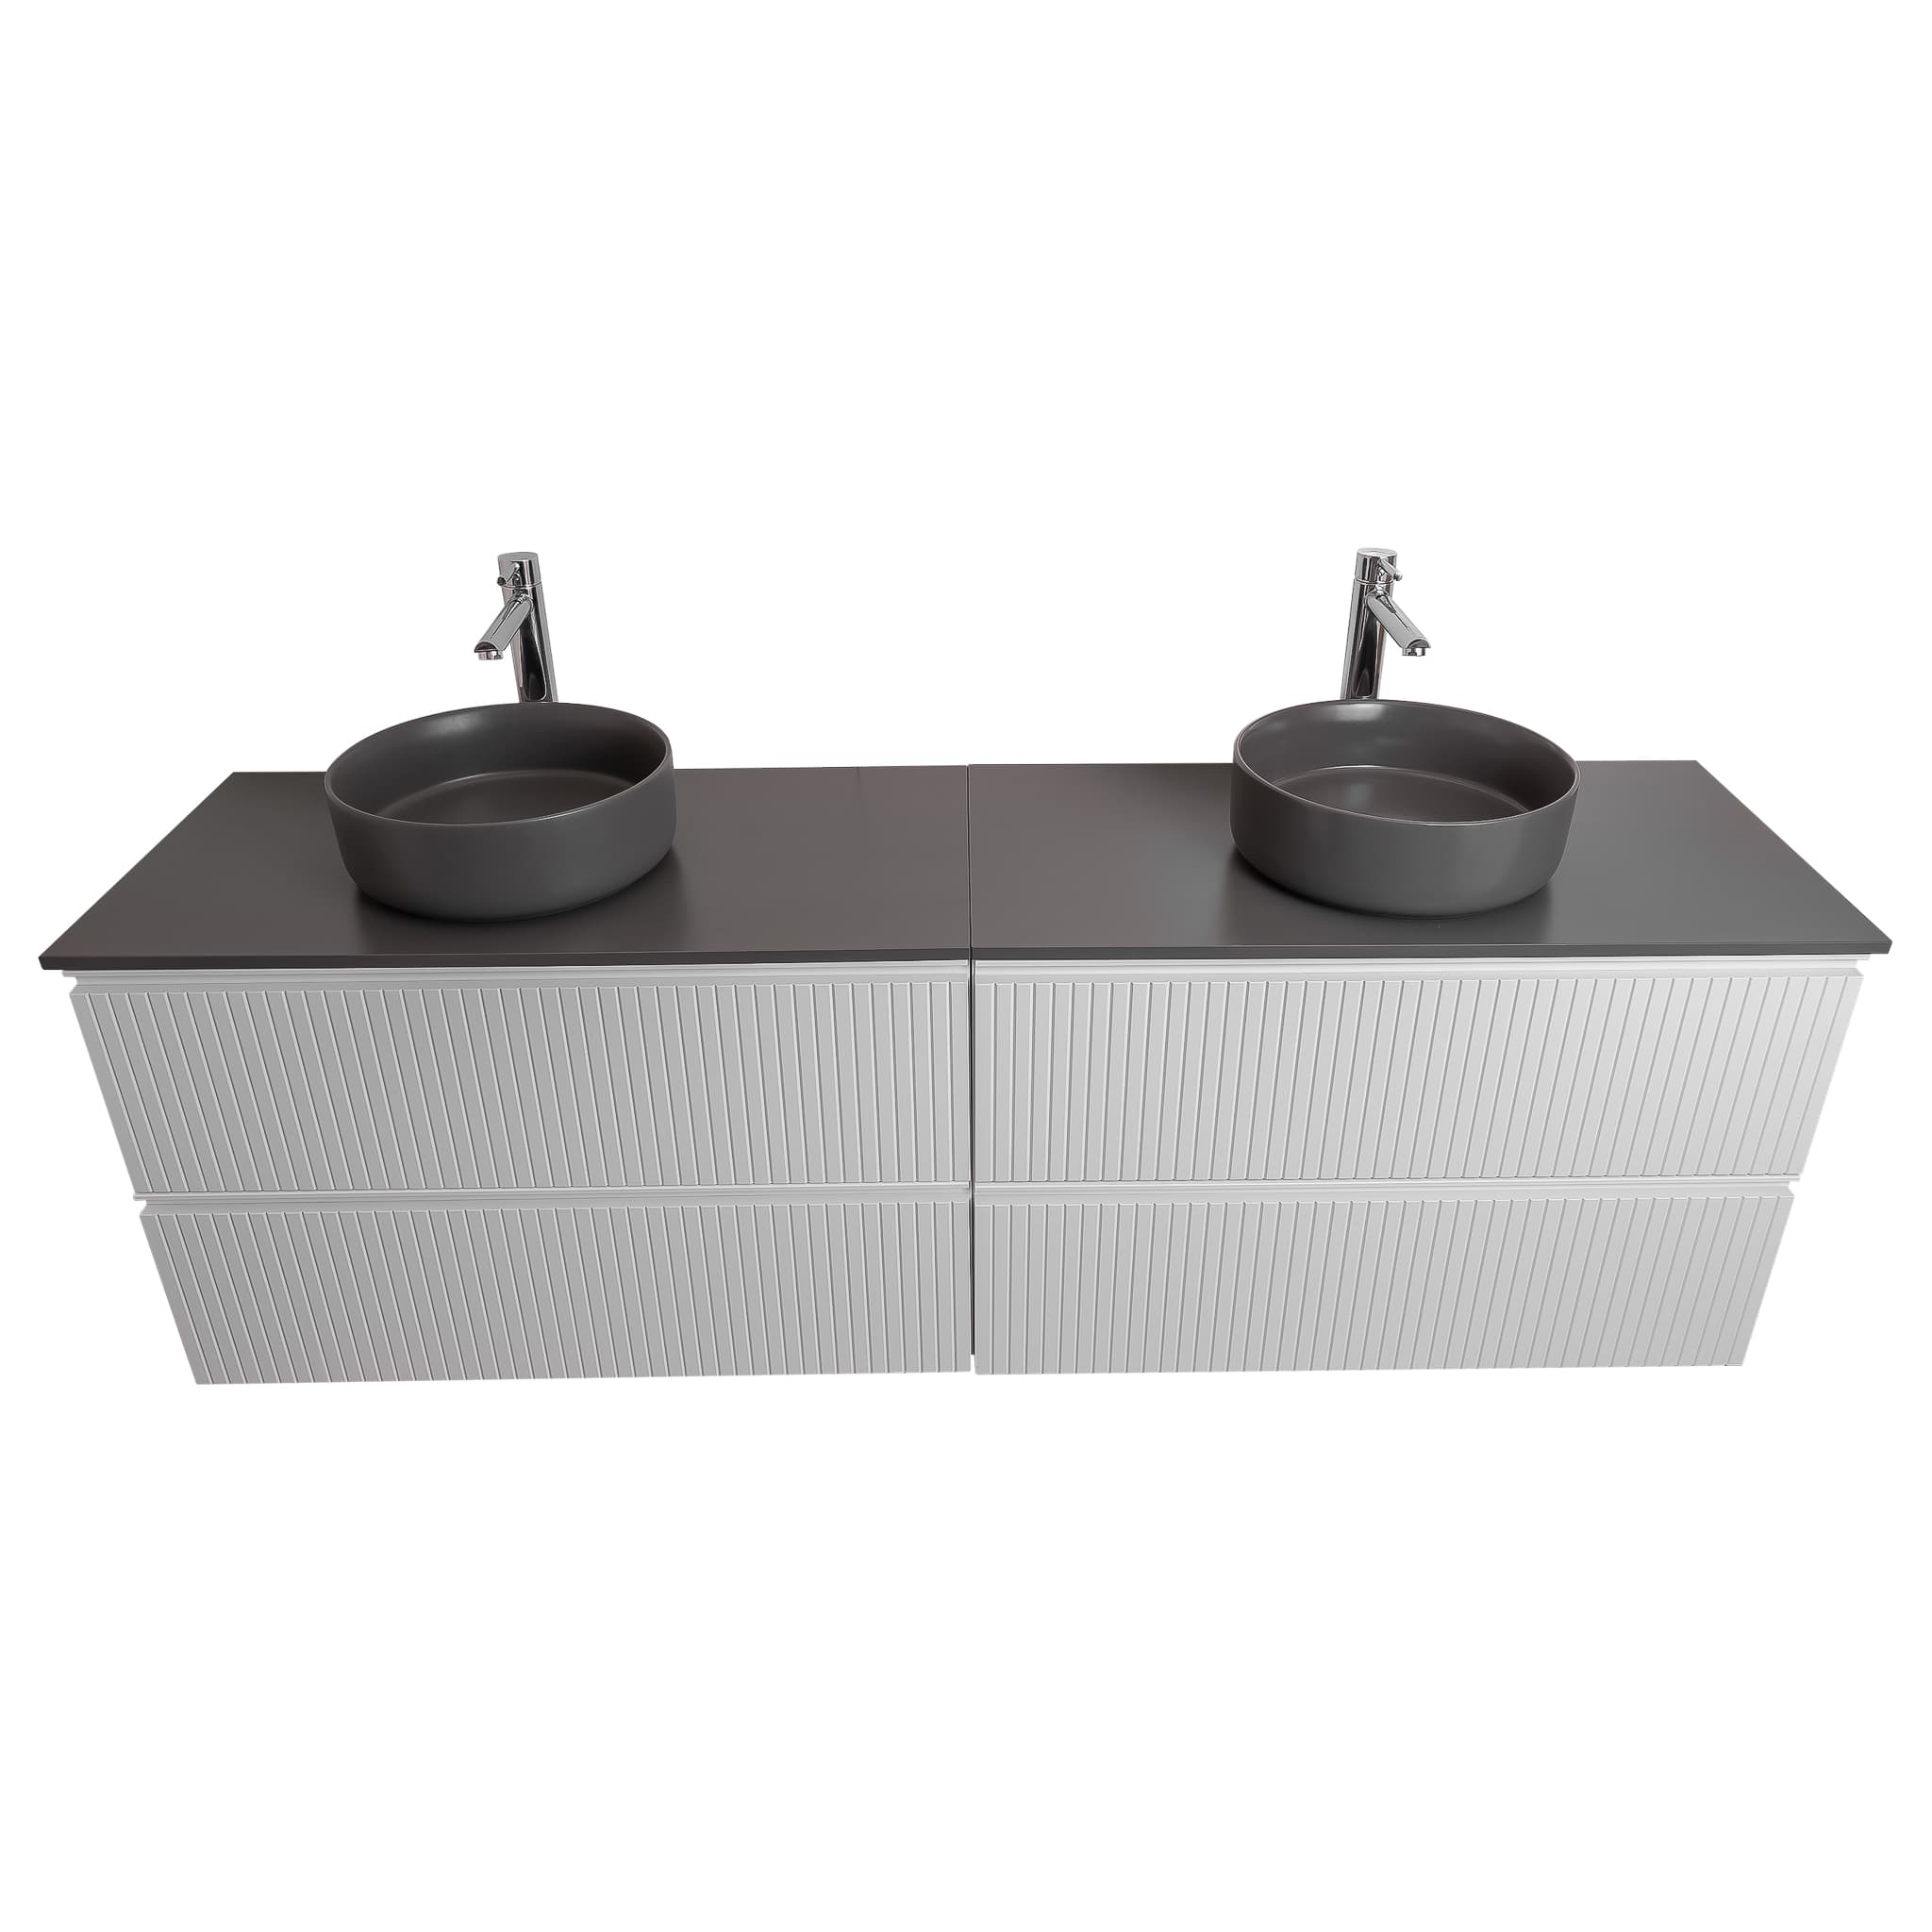 Ares 63 Matte White Cabinet, Ares Grey Ceniza Top And Two Ares Grey Ceniza Ceramic Basin, Wall Mounted Modern Vanity Set